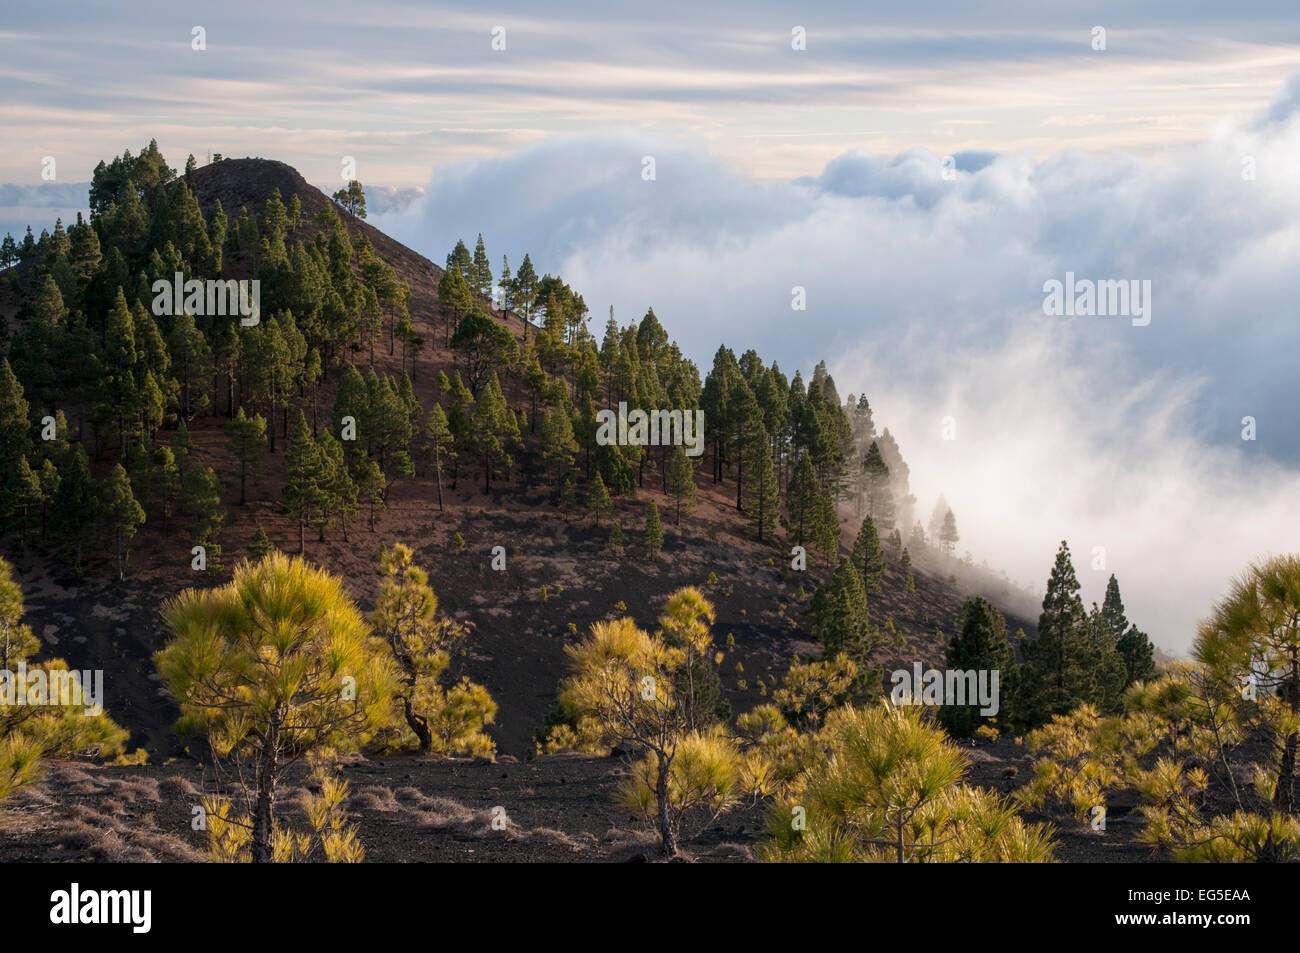 As trade winds are climbing up the slopes of Canary Island  La Palma moisture condensates and trade wind cumuli develop. Stock Photo